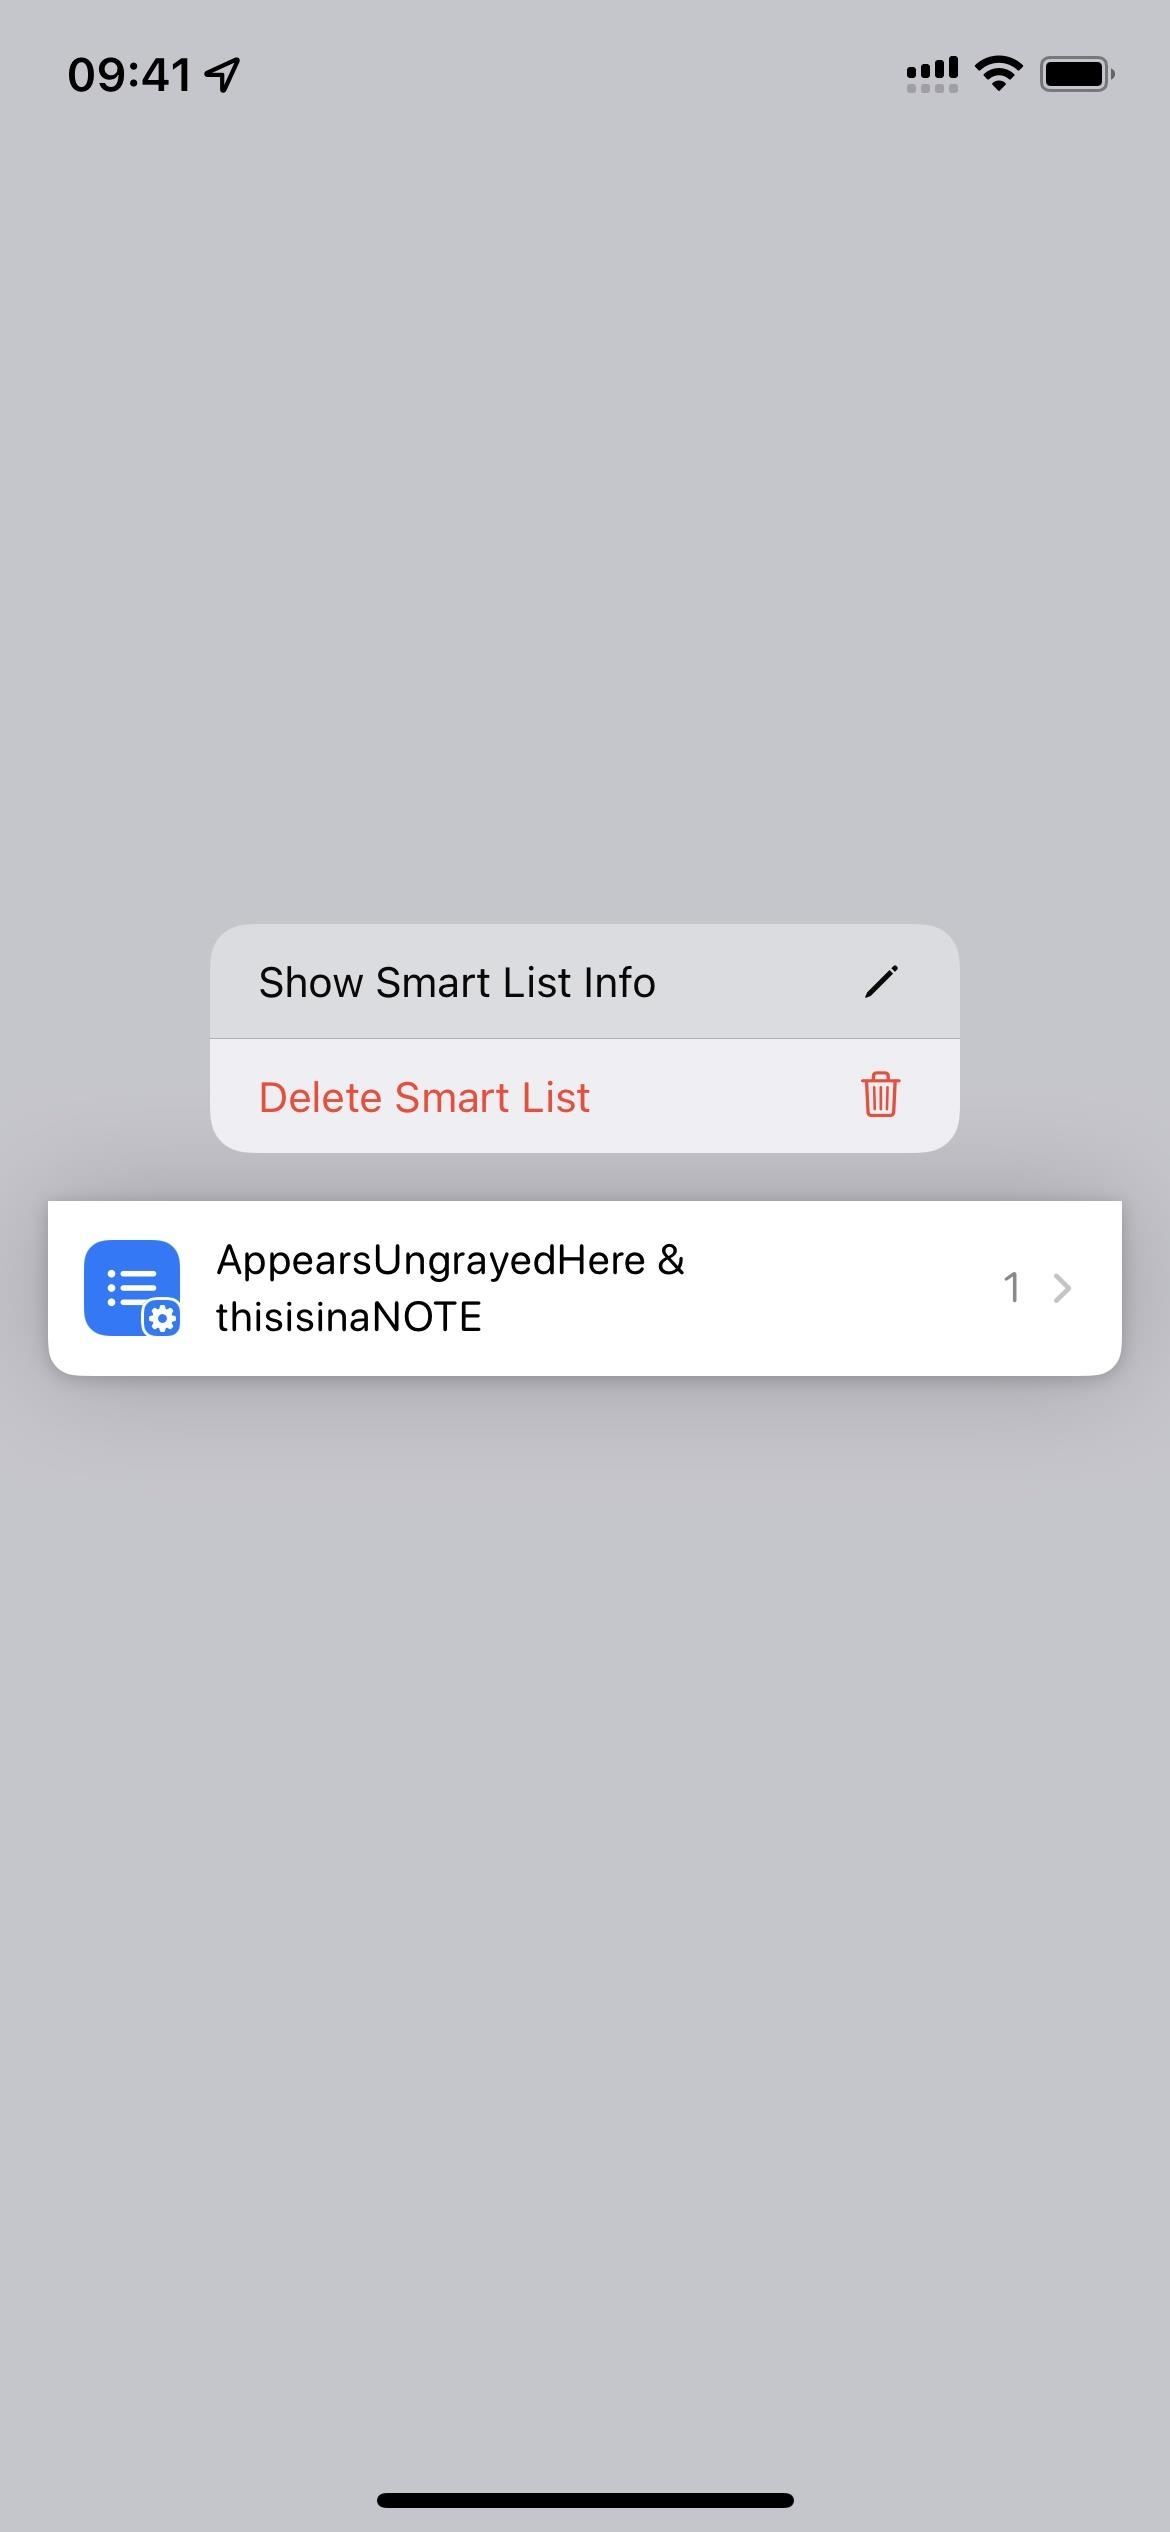 Organize Your iPhone Reminders with Tags You Can Search, Filter, Browse, and Create Smart Lists From